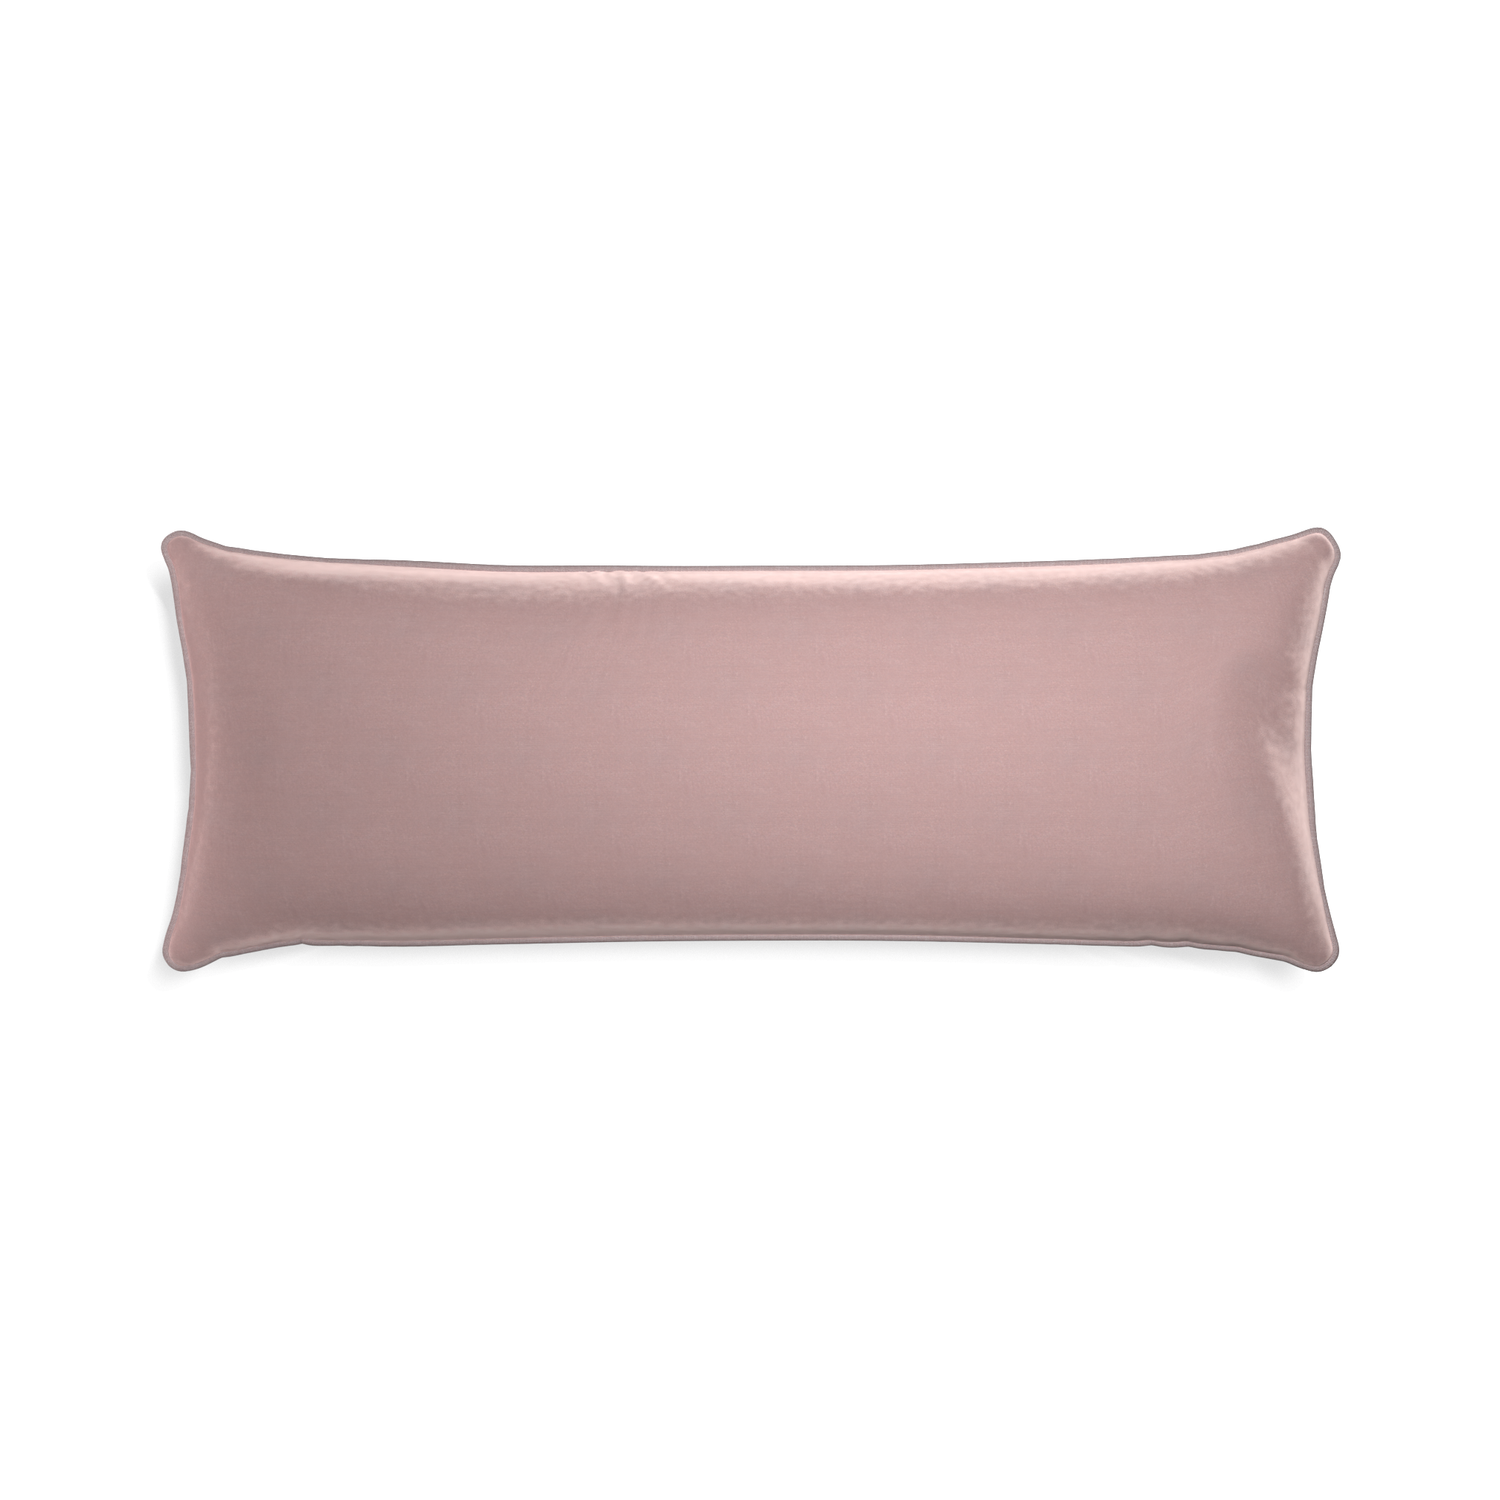 Xl-lumbar mauve velvet custom mauvepillow with orchid piping on white background